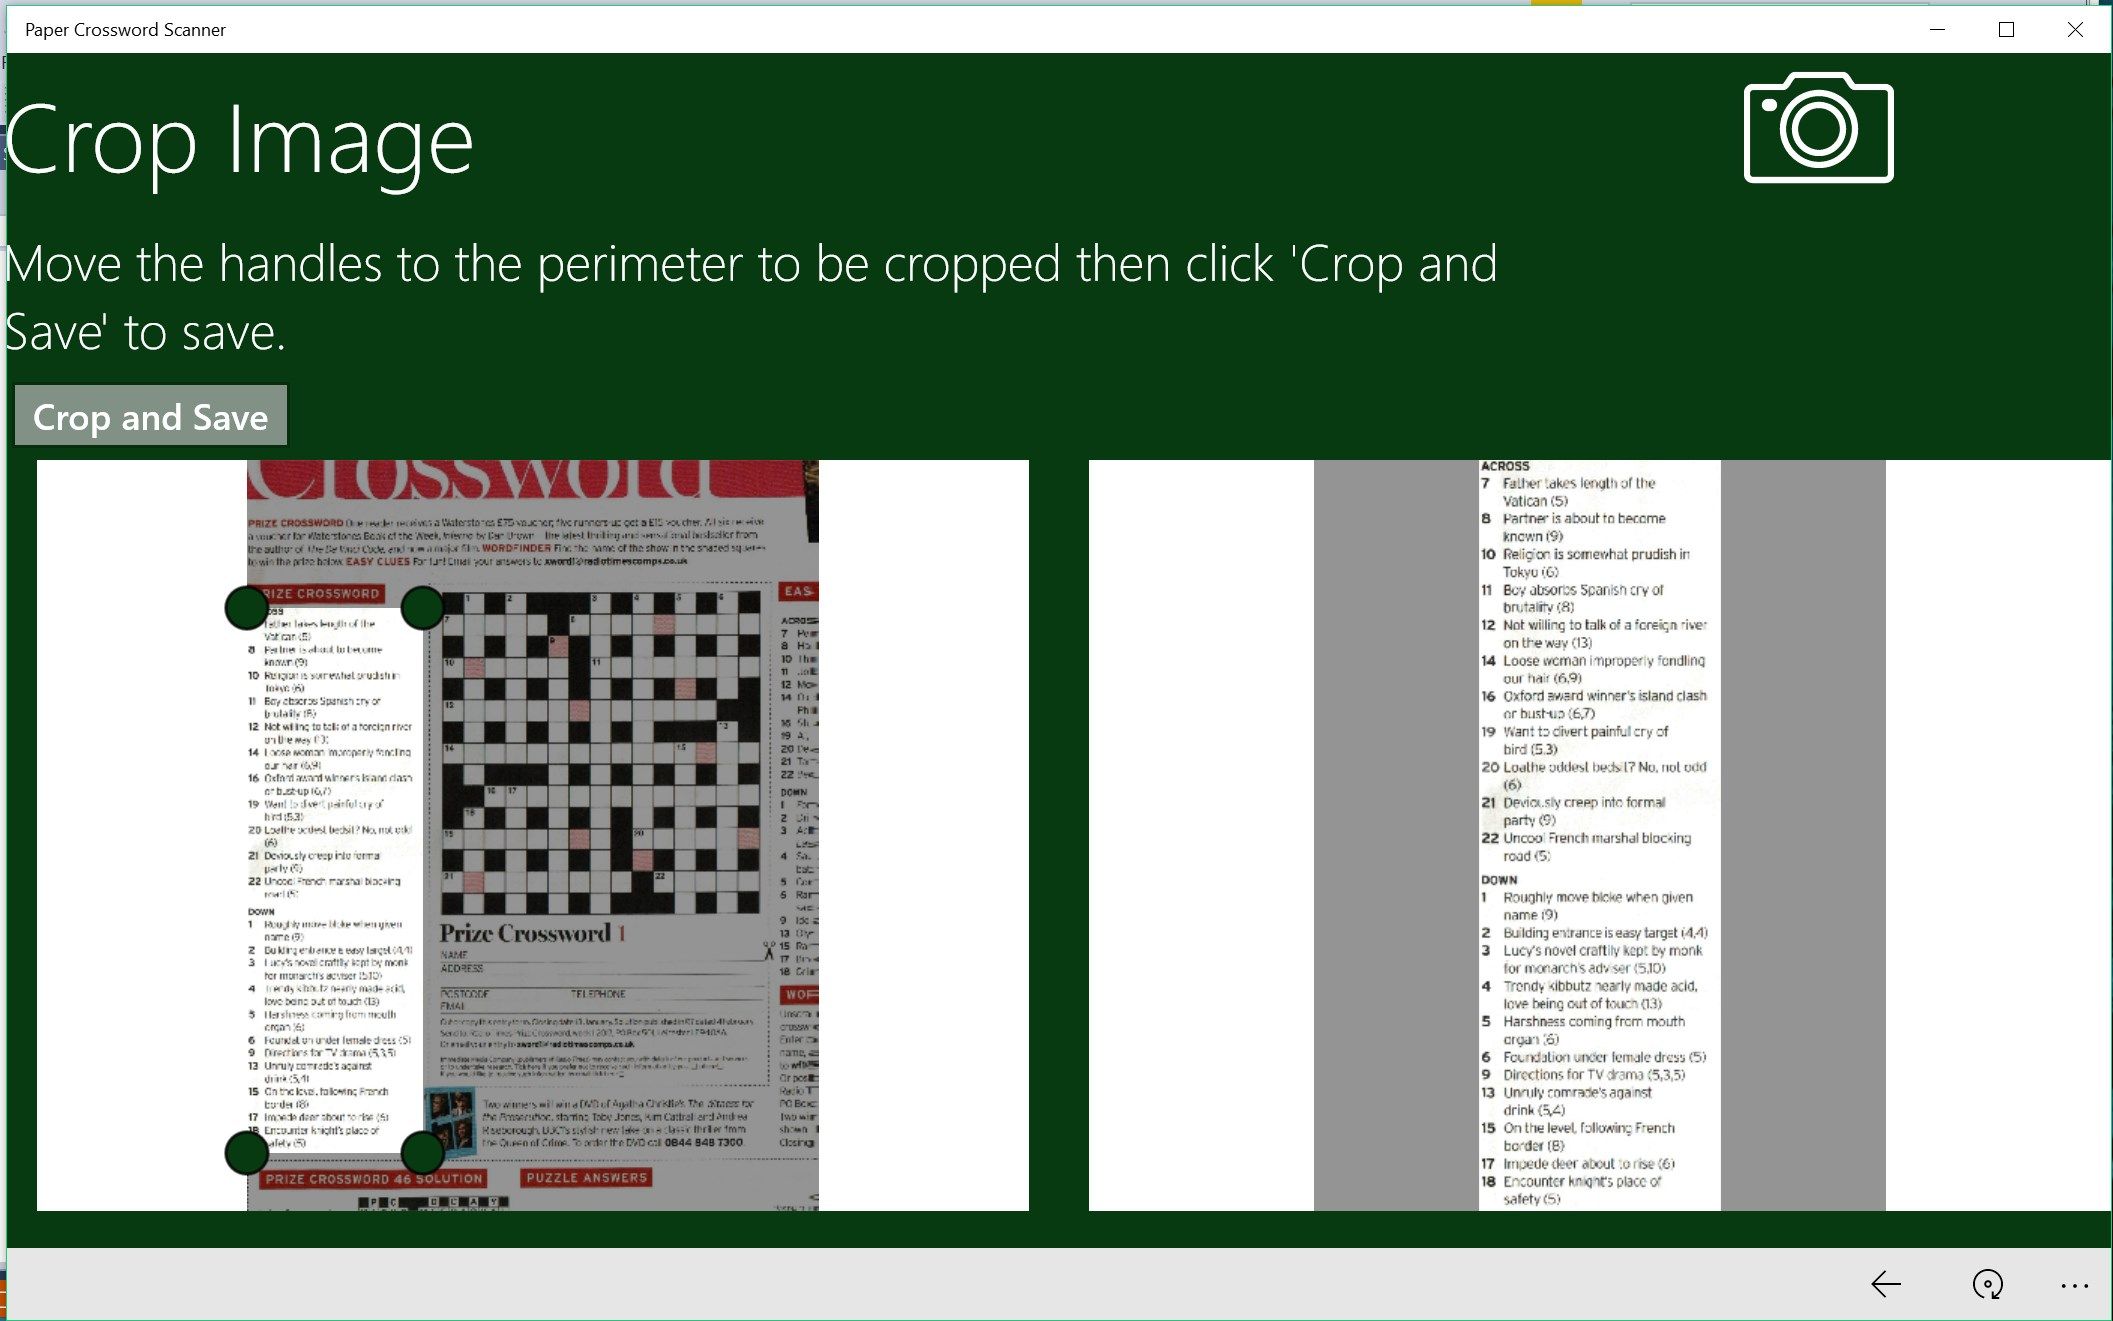 Take an image of your paper crossword and crop the clues section.